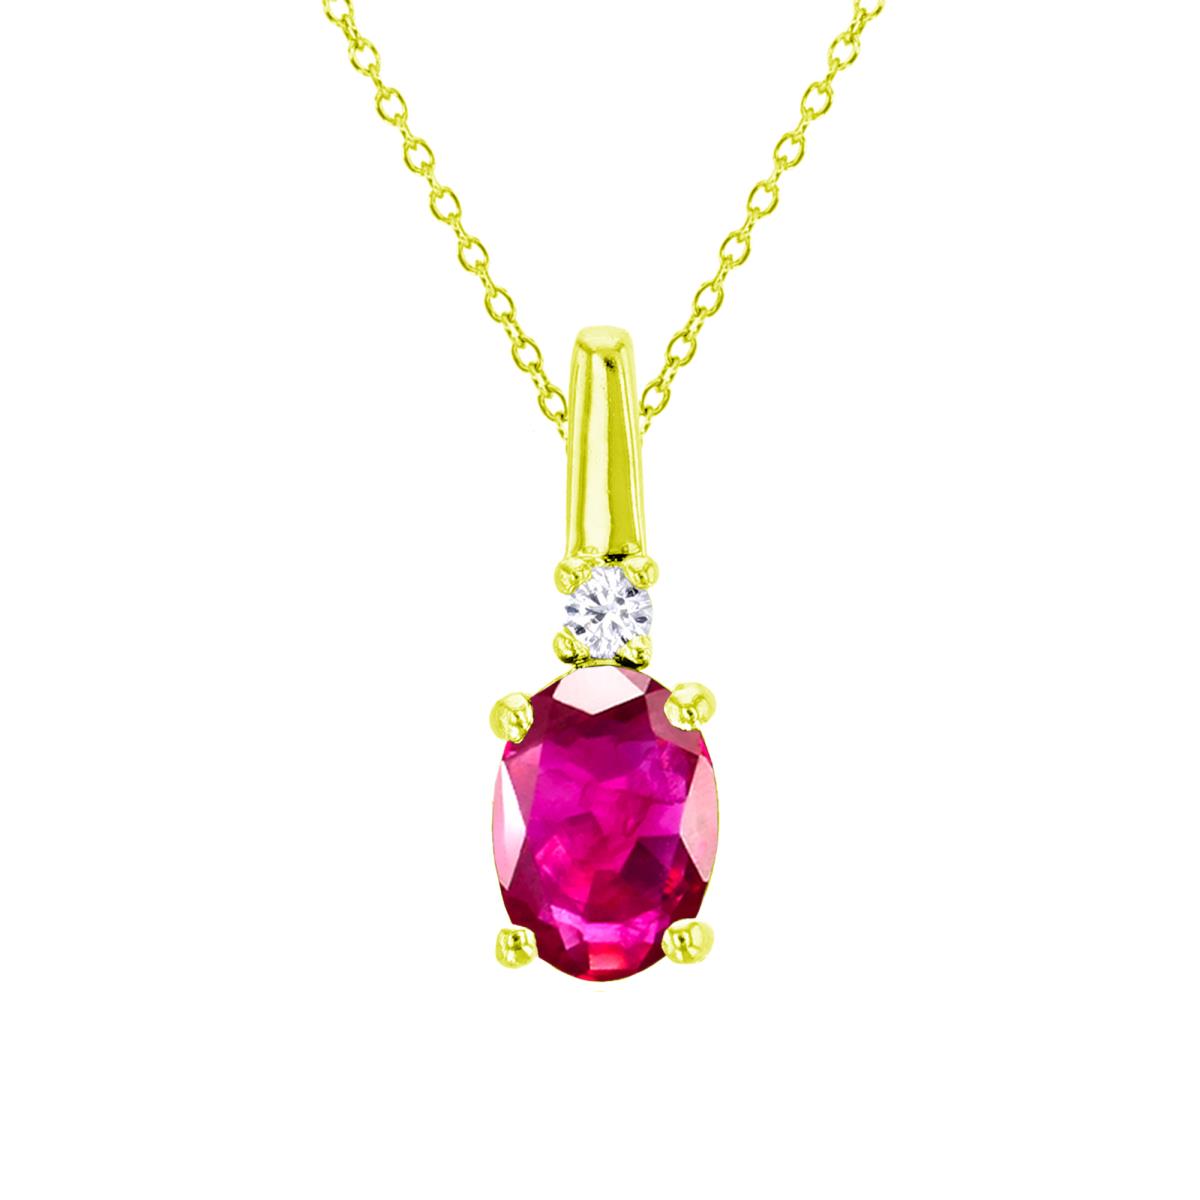 10K Yellow Gold 0.01cttw Rnd Diamonds & 7x5mm Ov Glass Filled Ruby 18"Necklace